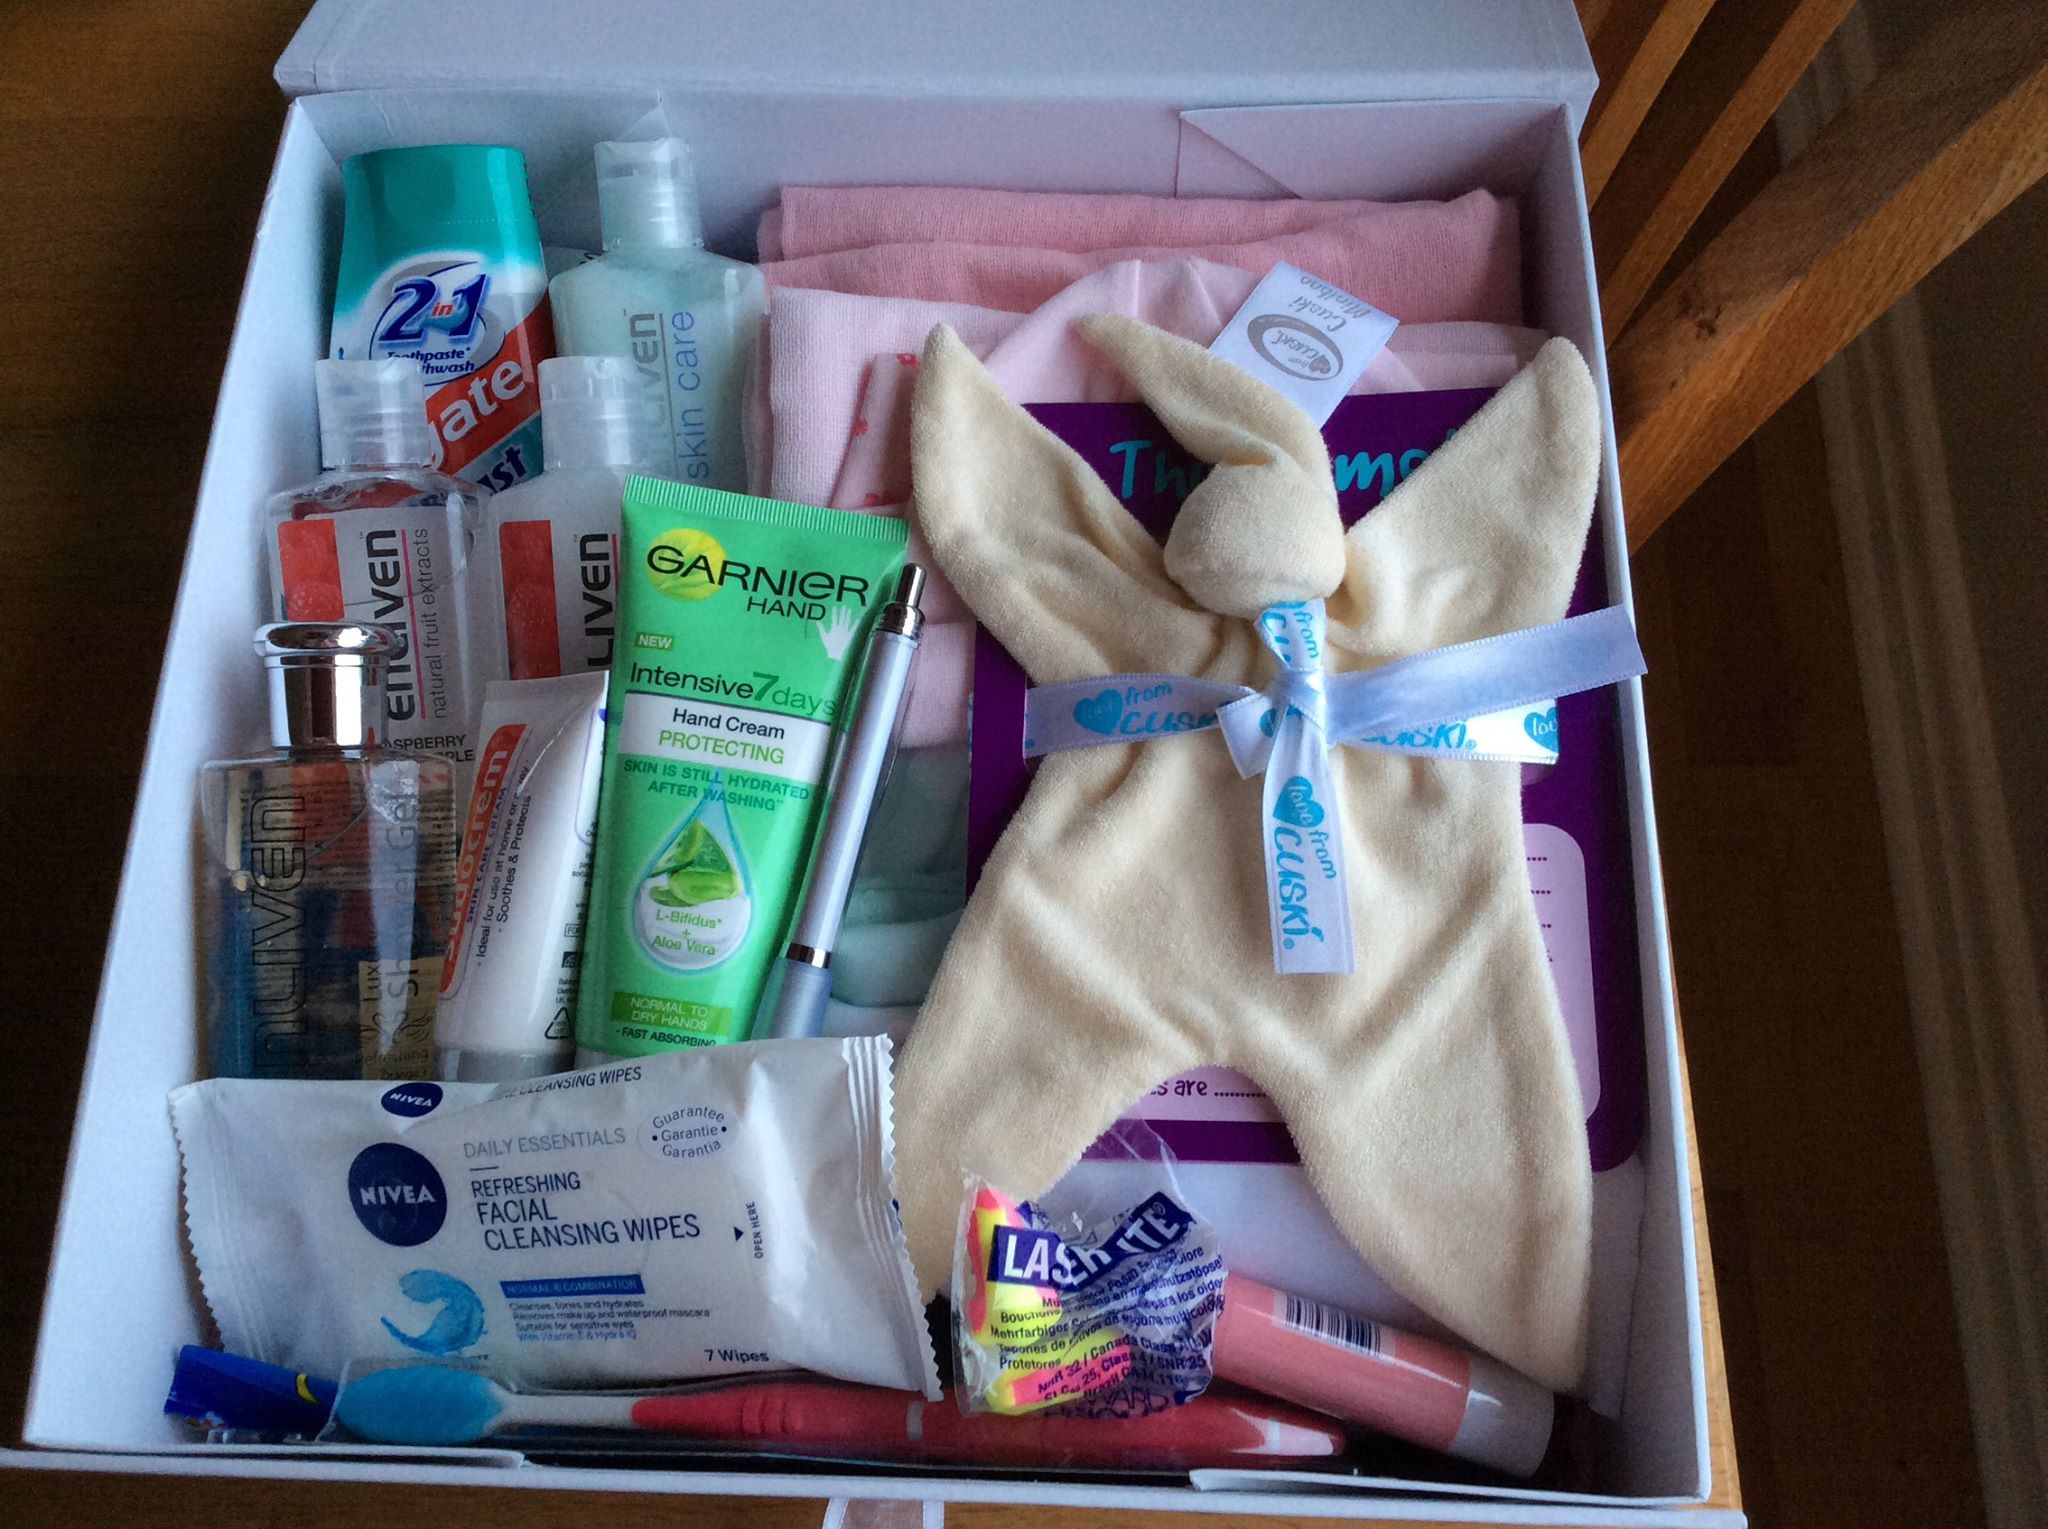 Contents of the Little Miracles box (A hug in a box